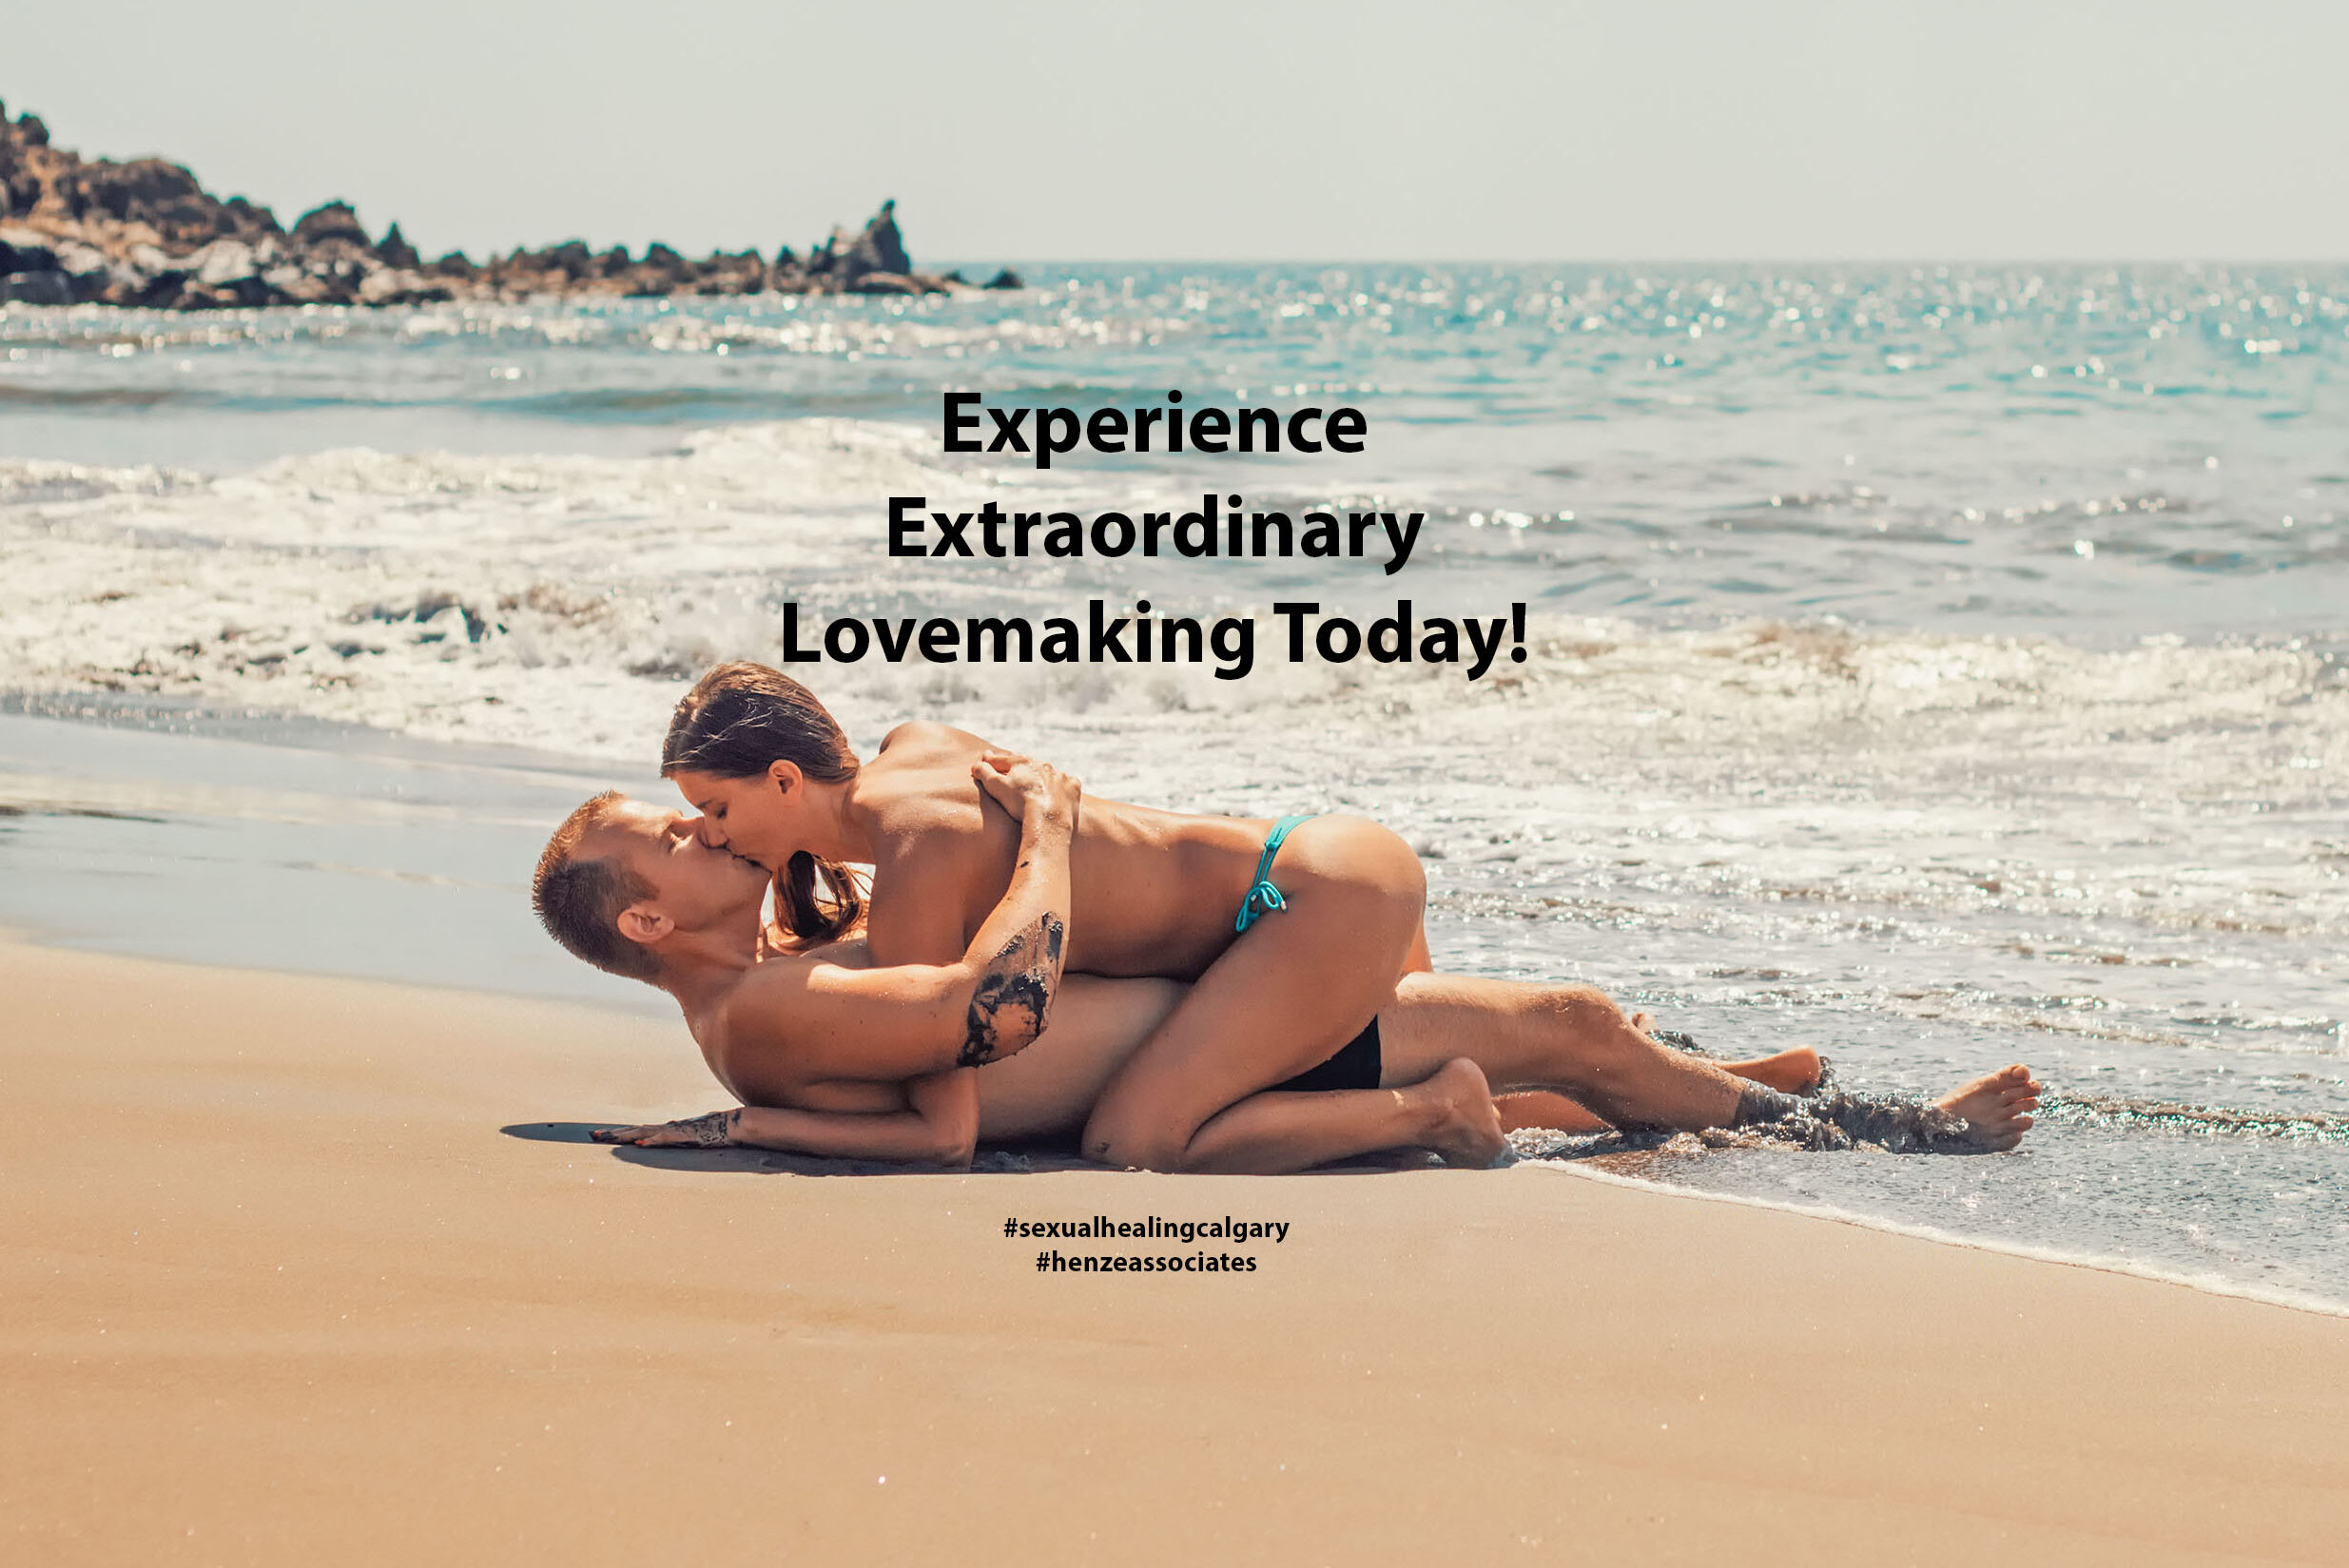 Sex Therapy Calgary post title image showing a man and woman on a beach at edge of waves in passionate embrace kissing